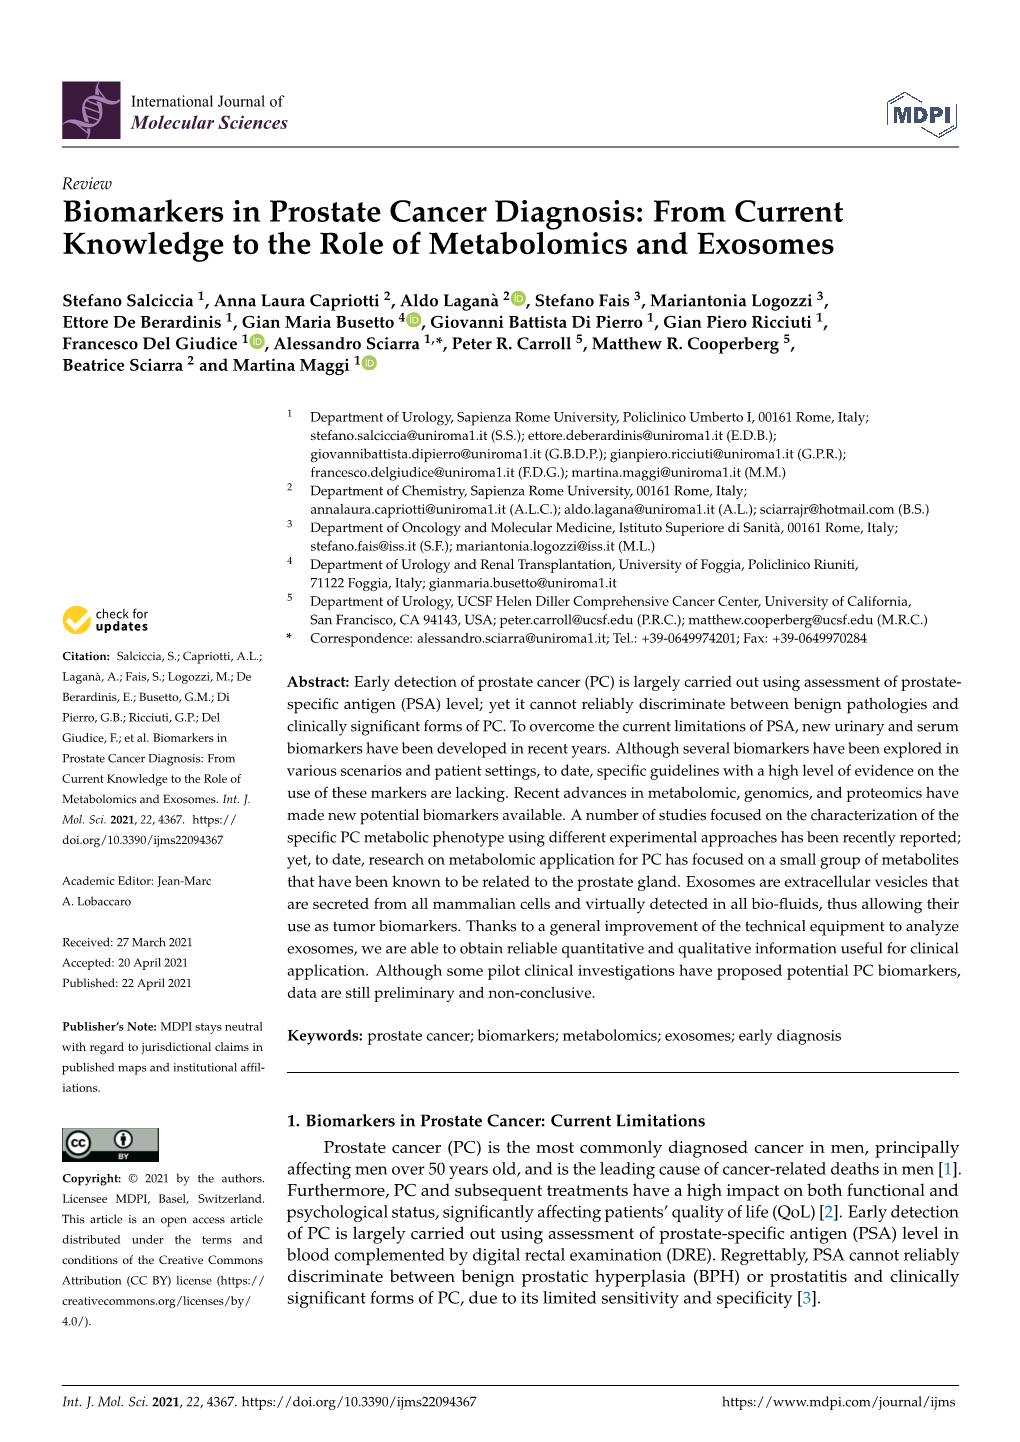 Biomarkers in Prostate Cancer Diagnosis: from Current Knowledge to the Role of Metabolomics and Exosomes